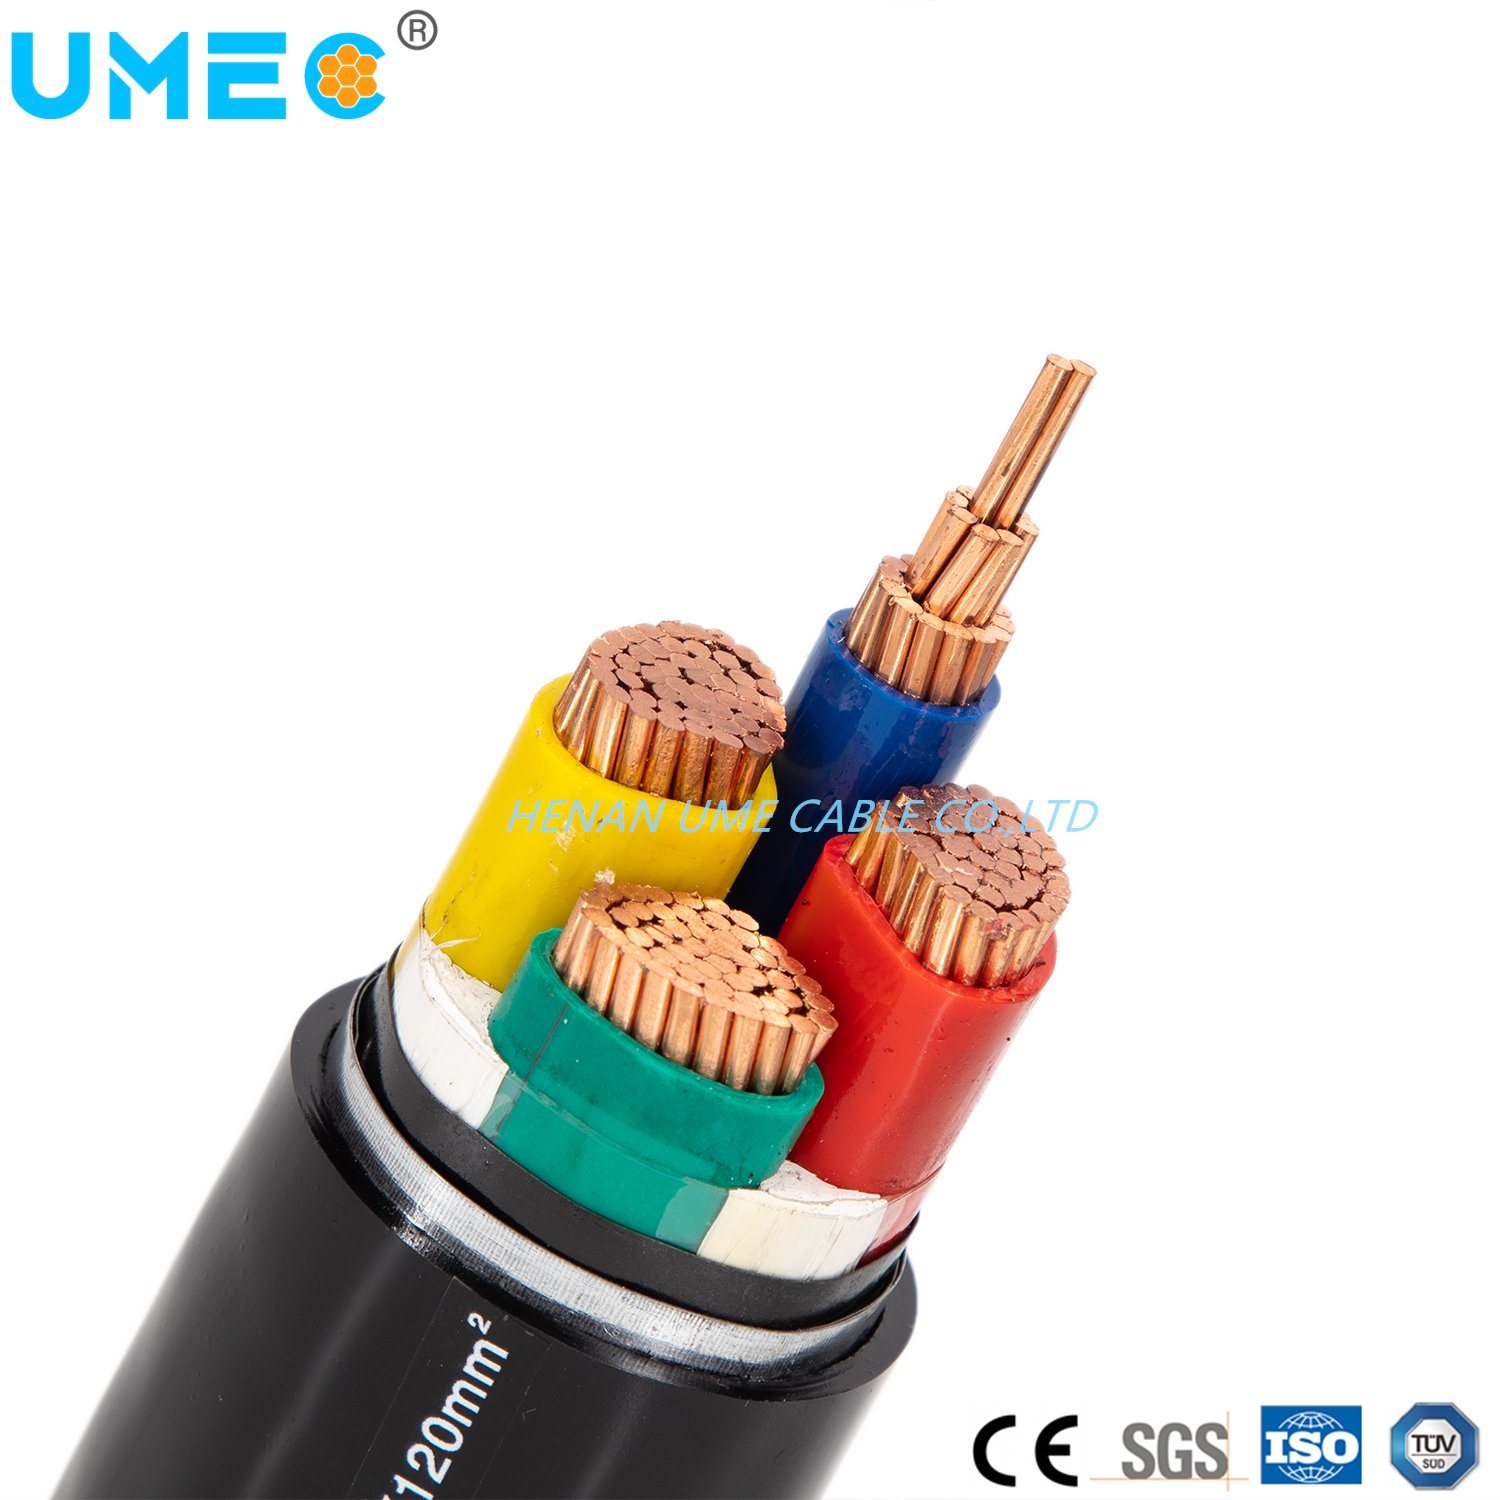 3 Cores+1earth Power Cable 3 Cores+2earth Power Cable LV Electric Power Cable